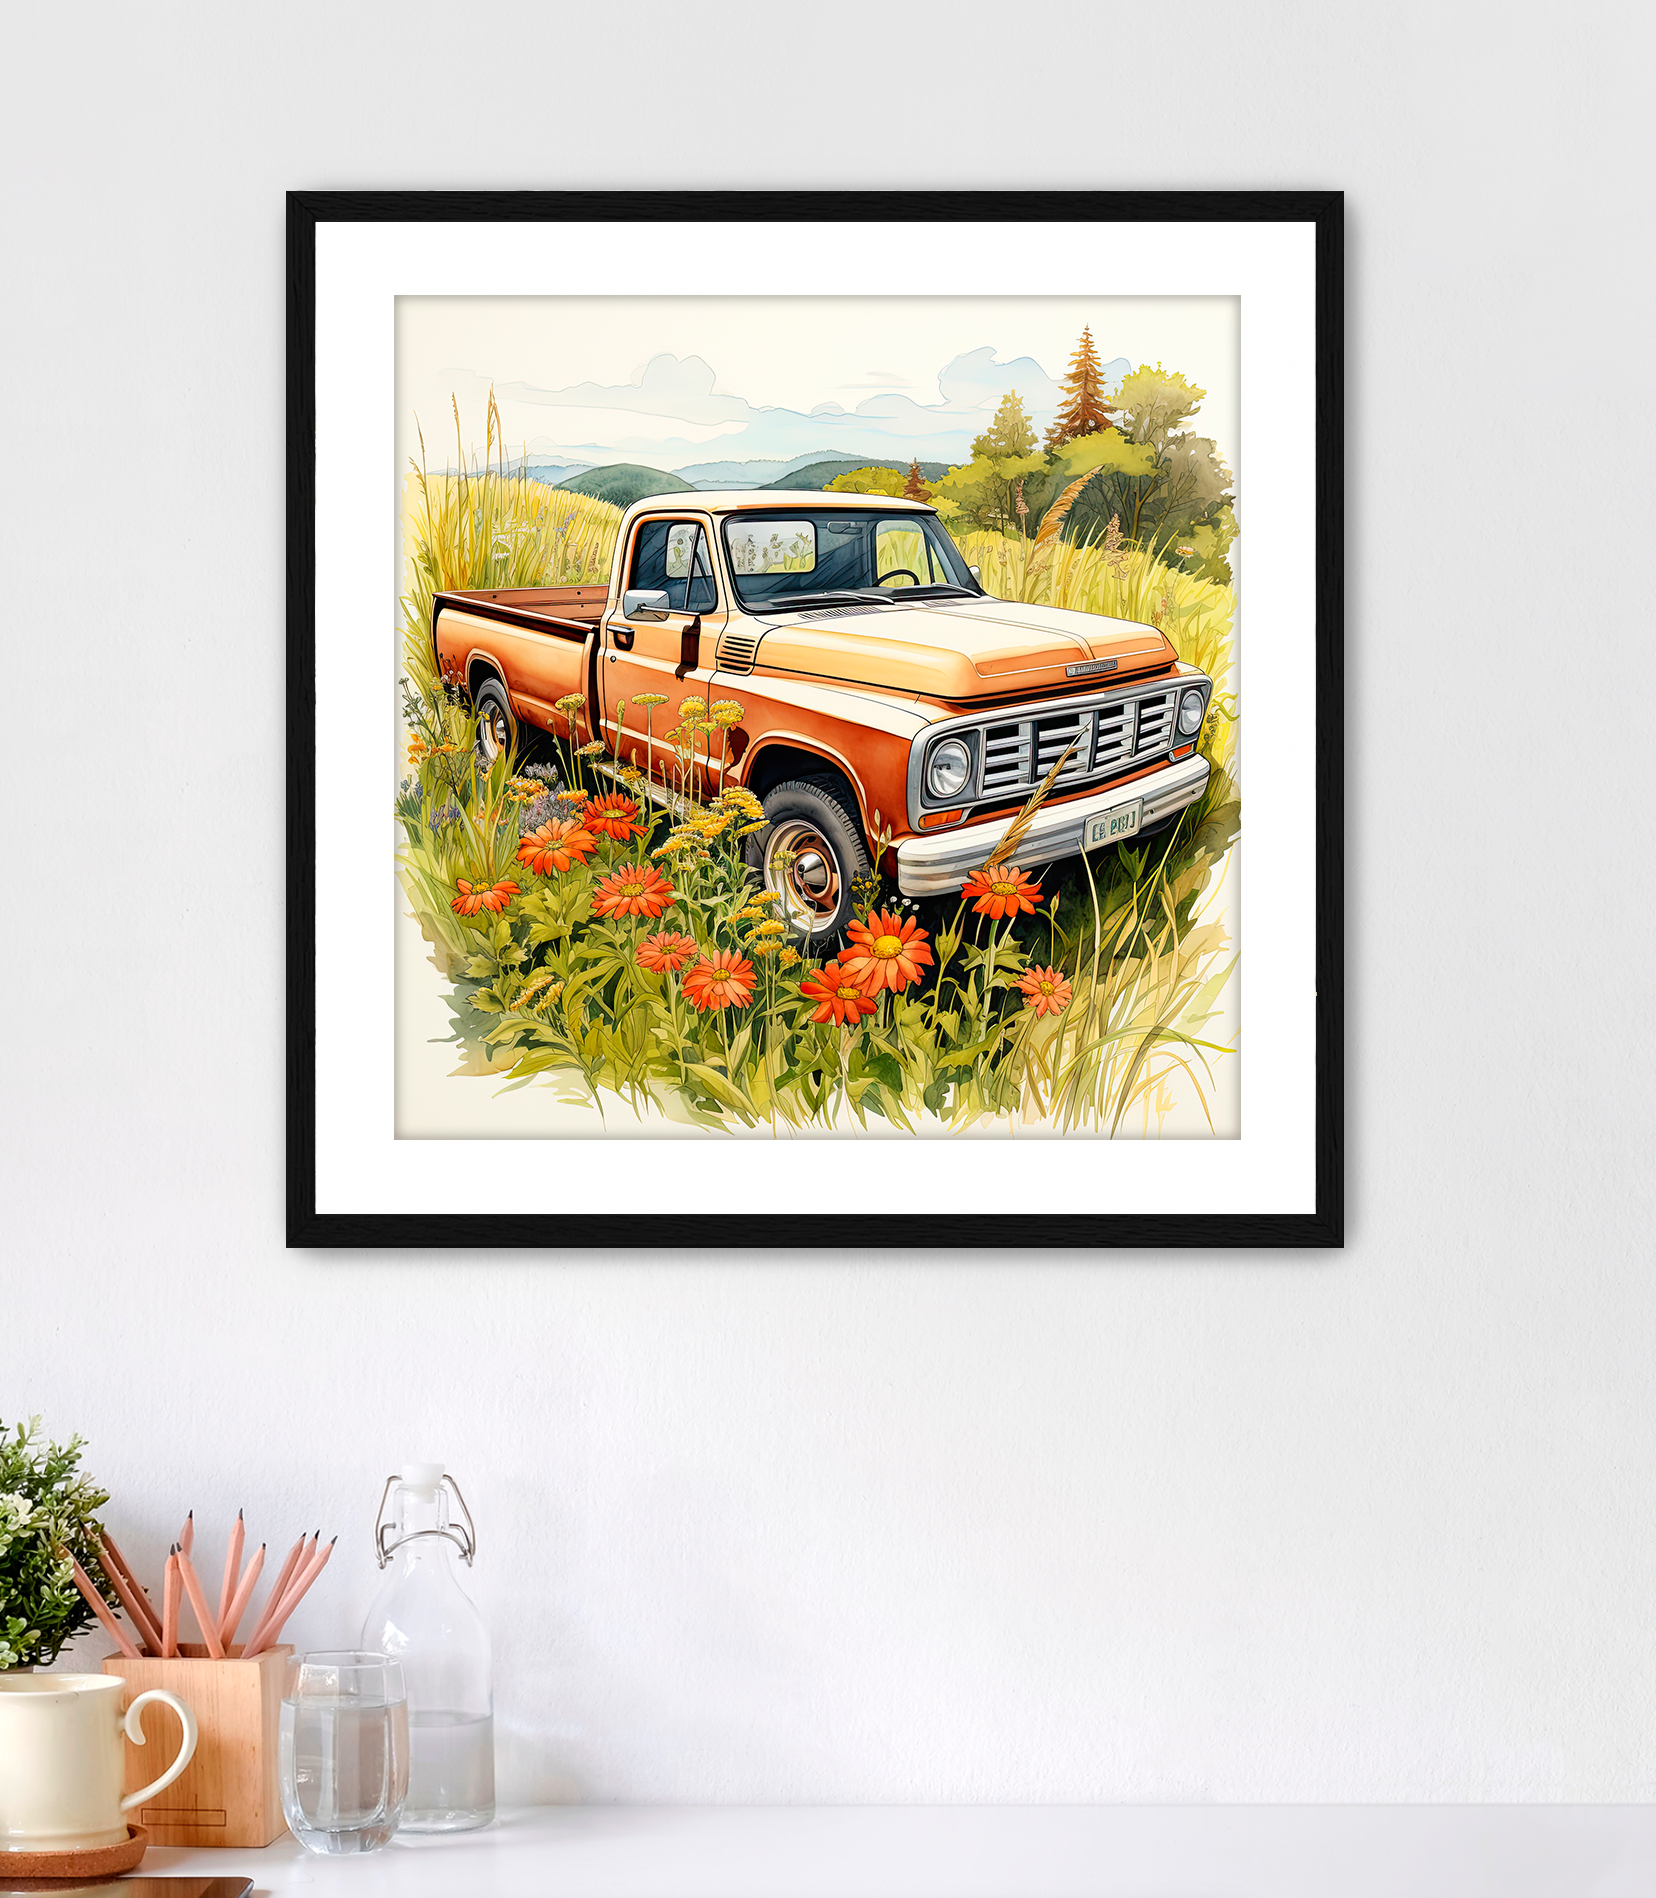 Rustic burnt orange pickup truck in a country field of flowers art, framed with white mat and black frame. Country art for sale.customconcepts.art